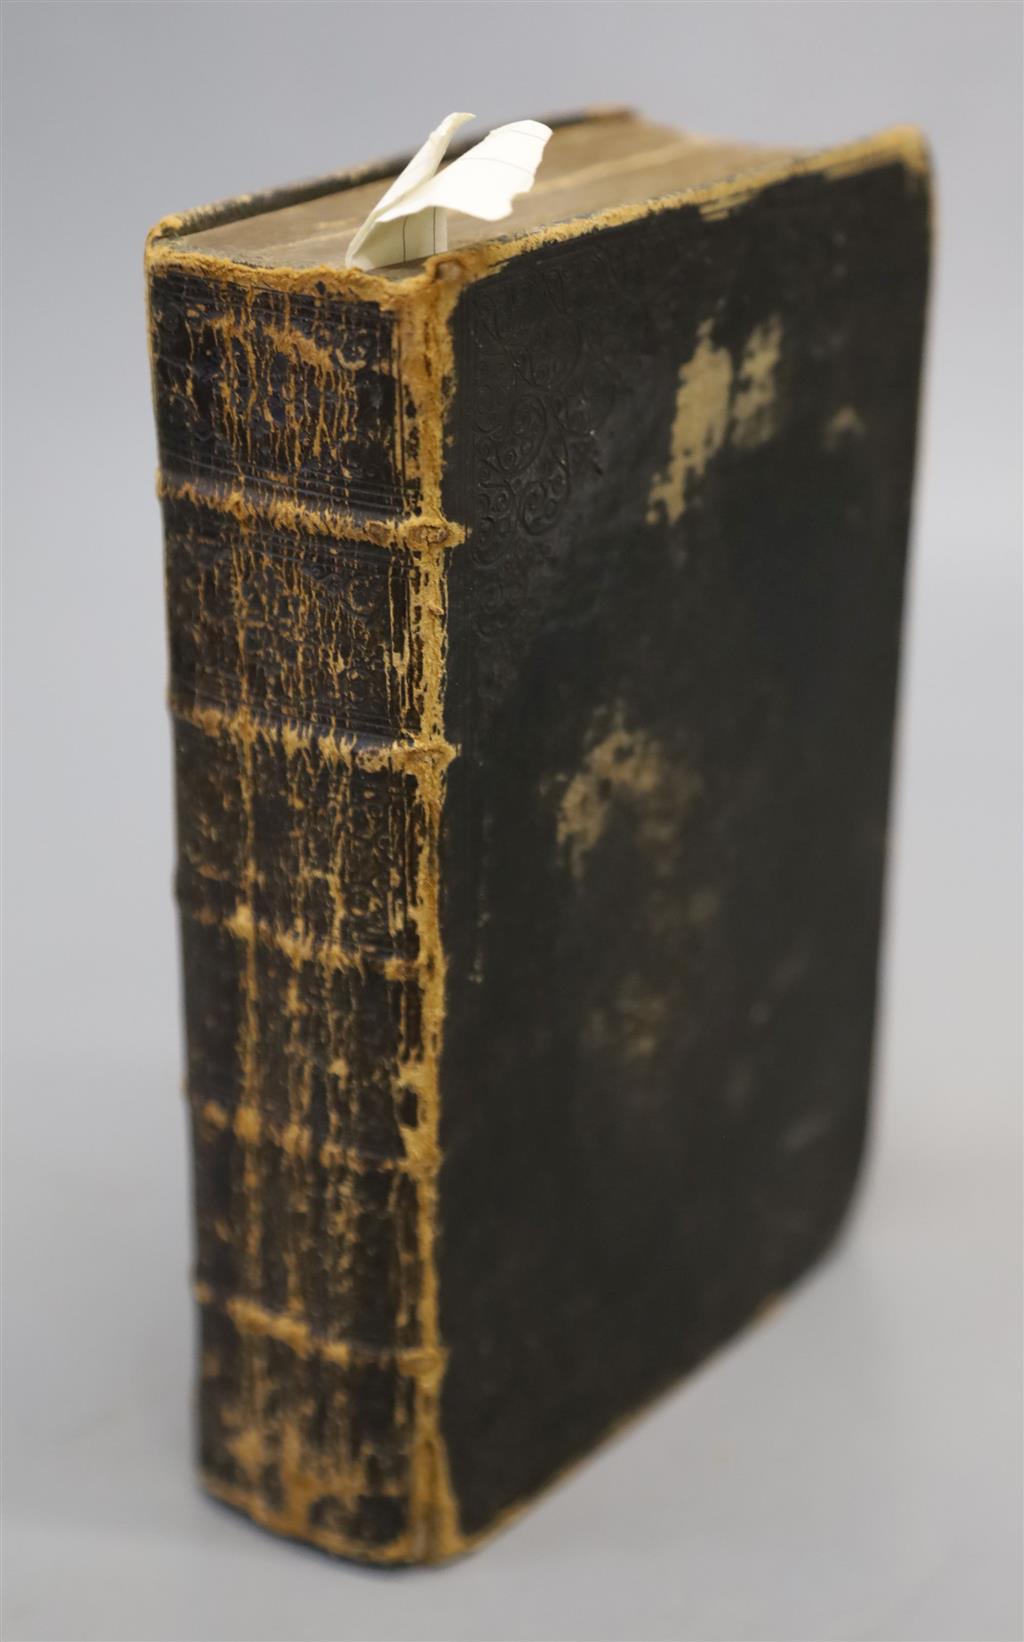 The Book of Common Prayer, 3 works in 1 vol, 8vo, contemporary calf, with portrait frontis and 53 plates, John Basket, London, 1727,